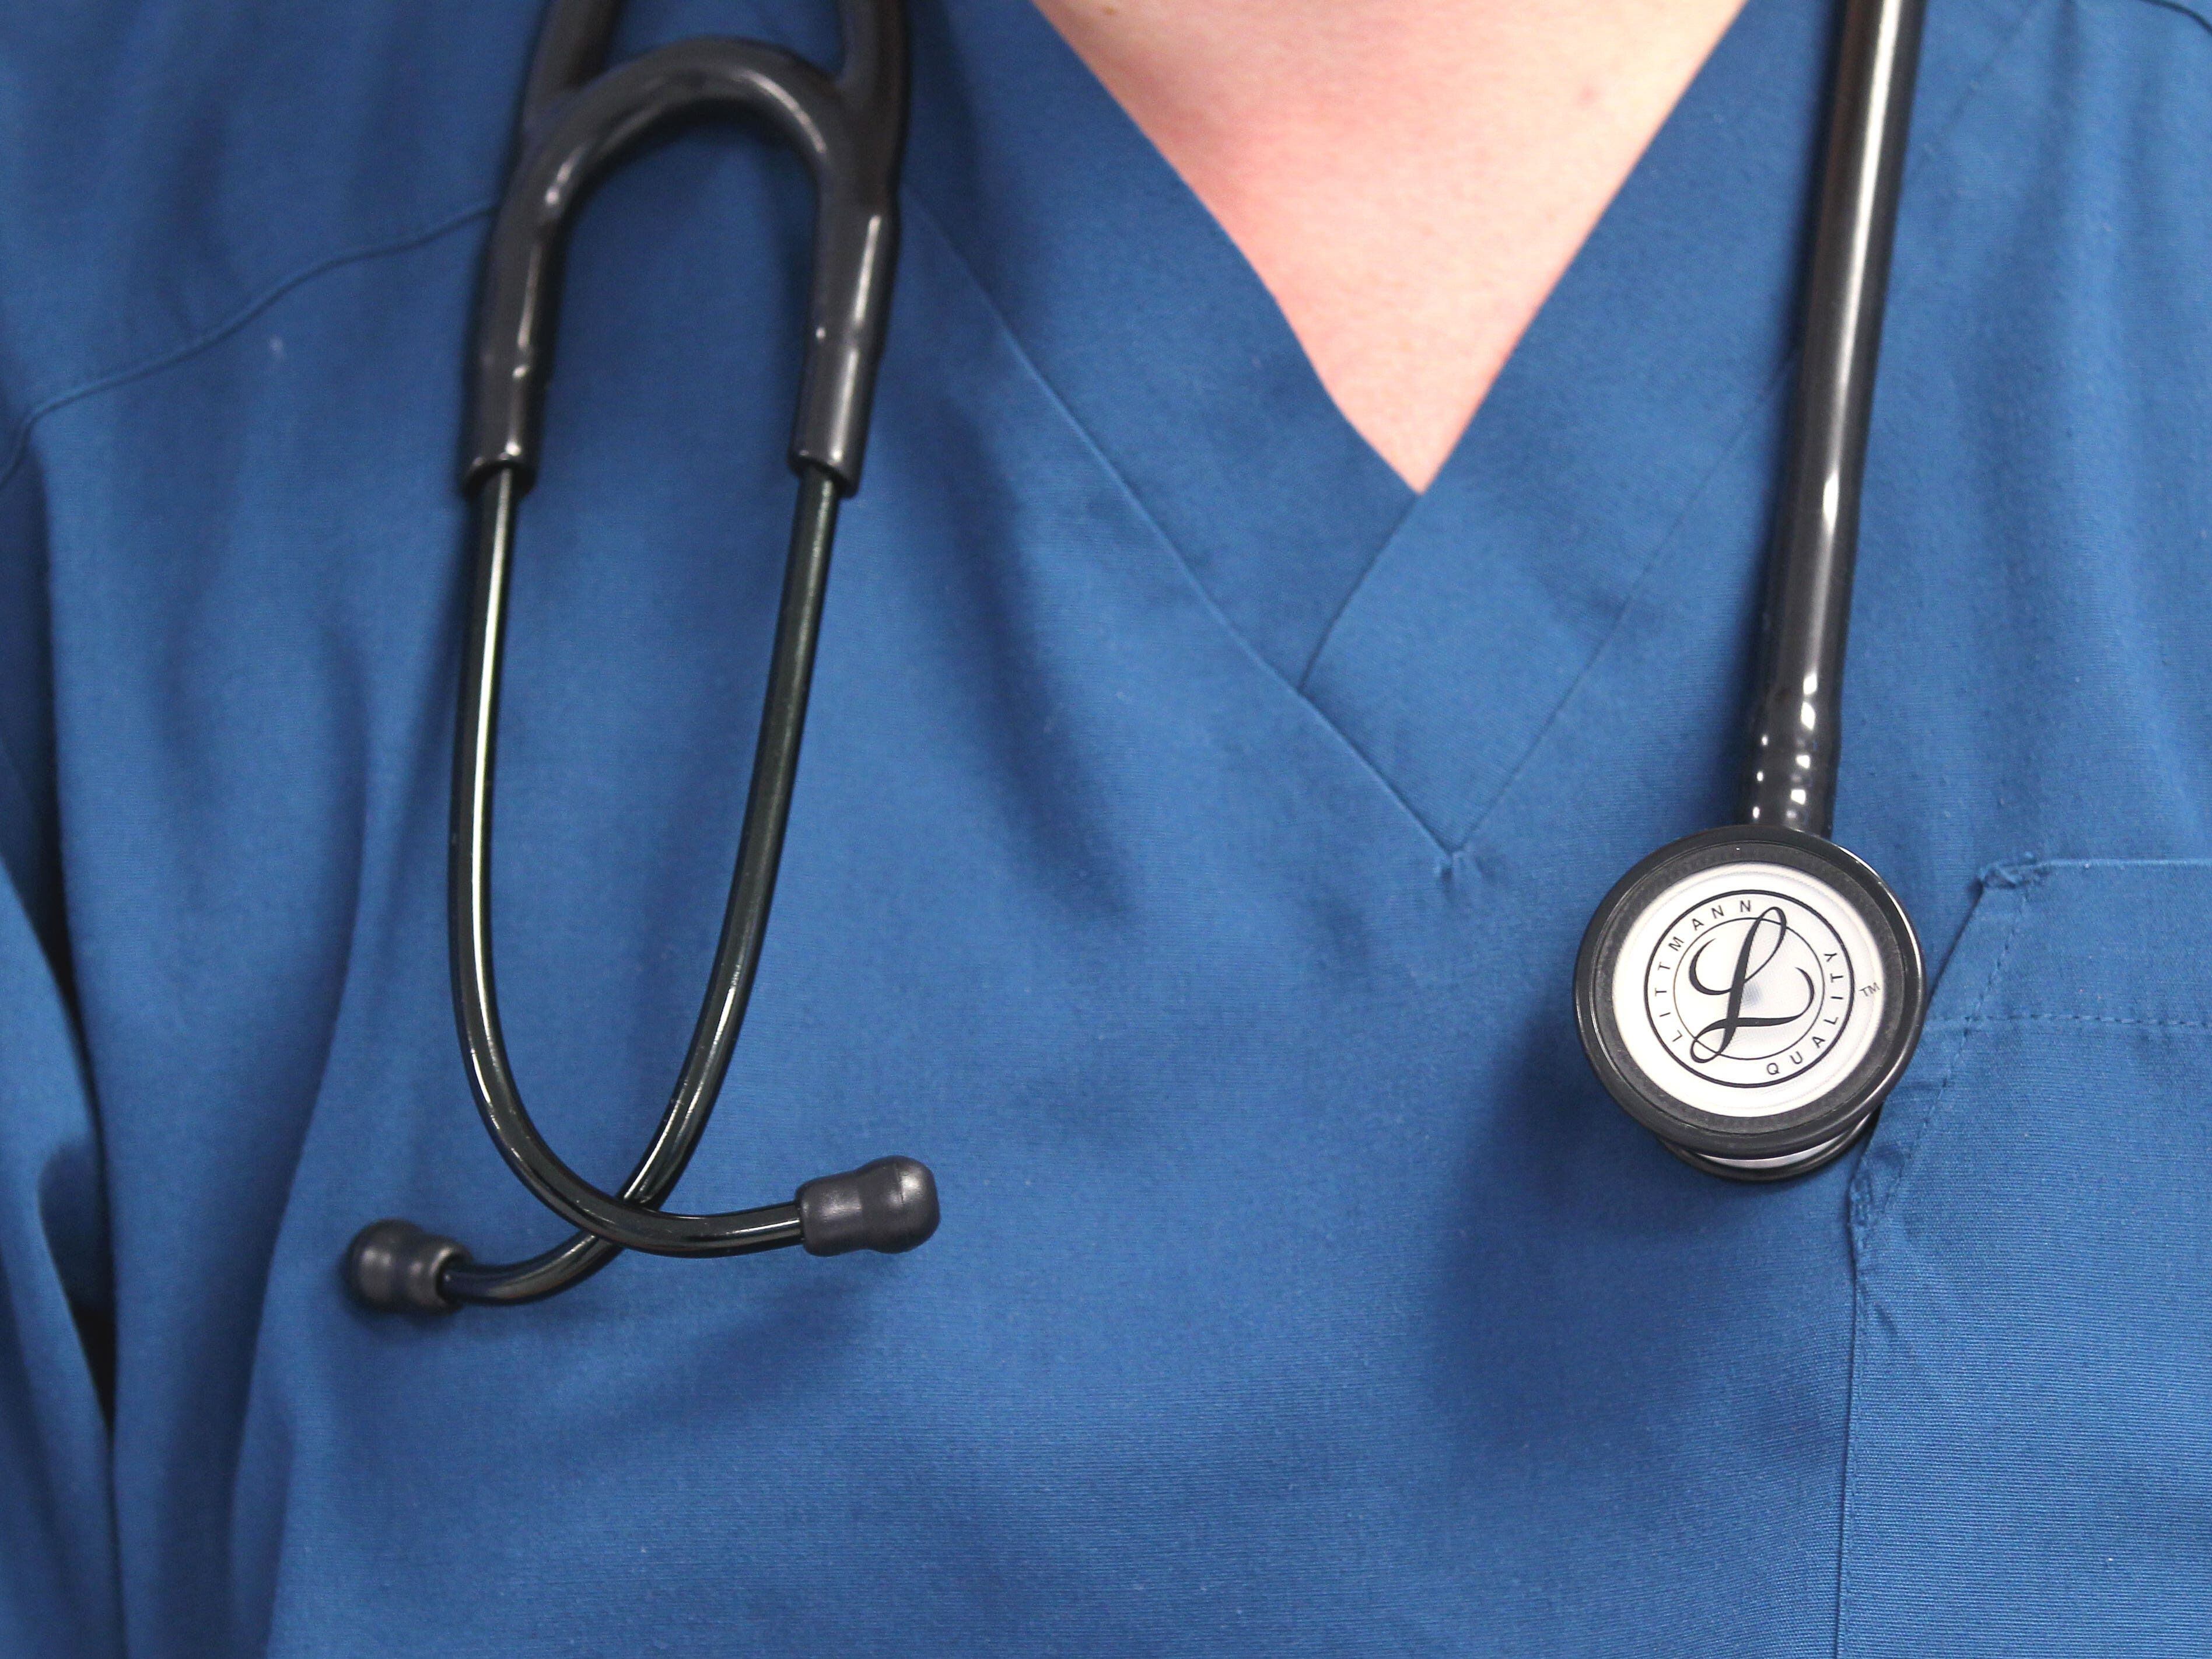 Ministers told to improve working conditions or risk losing top hospital doctors